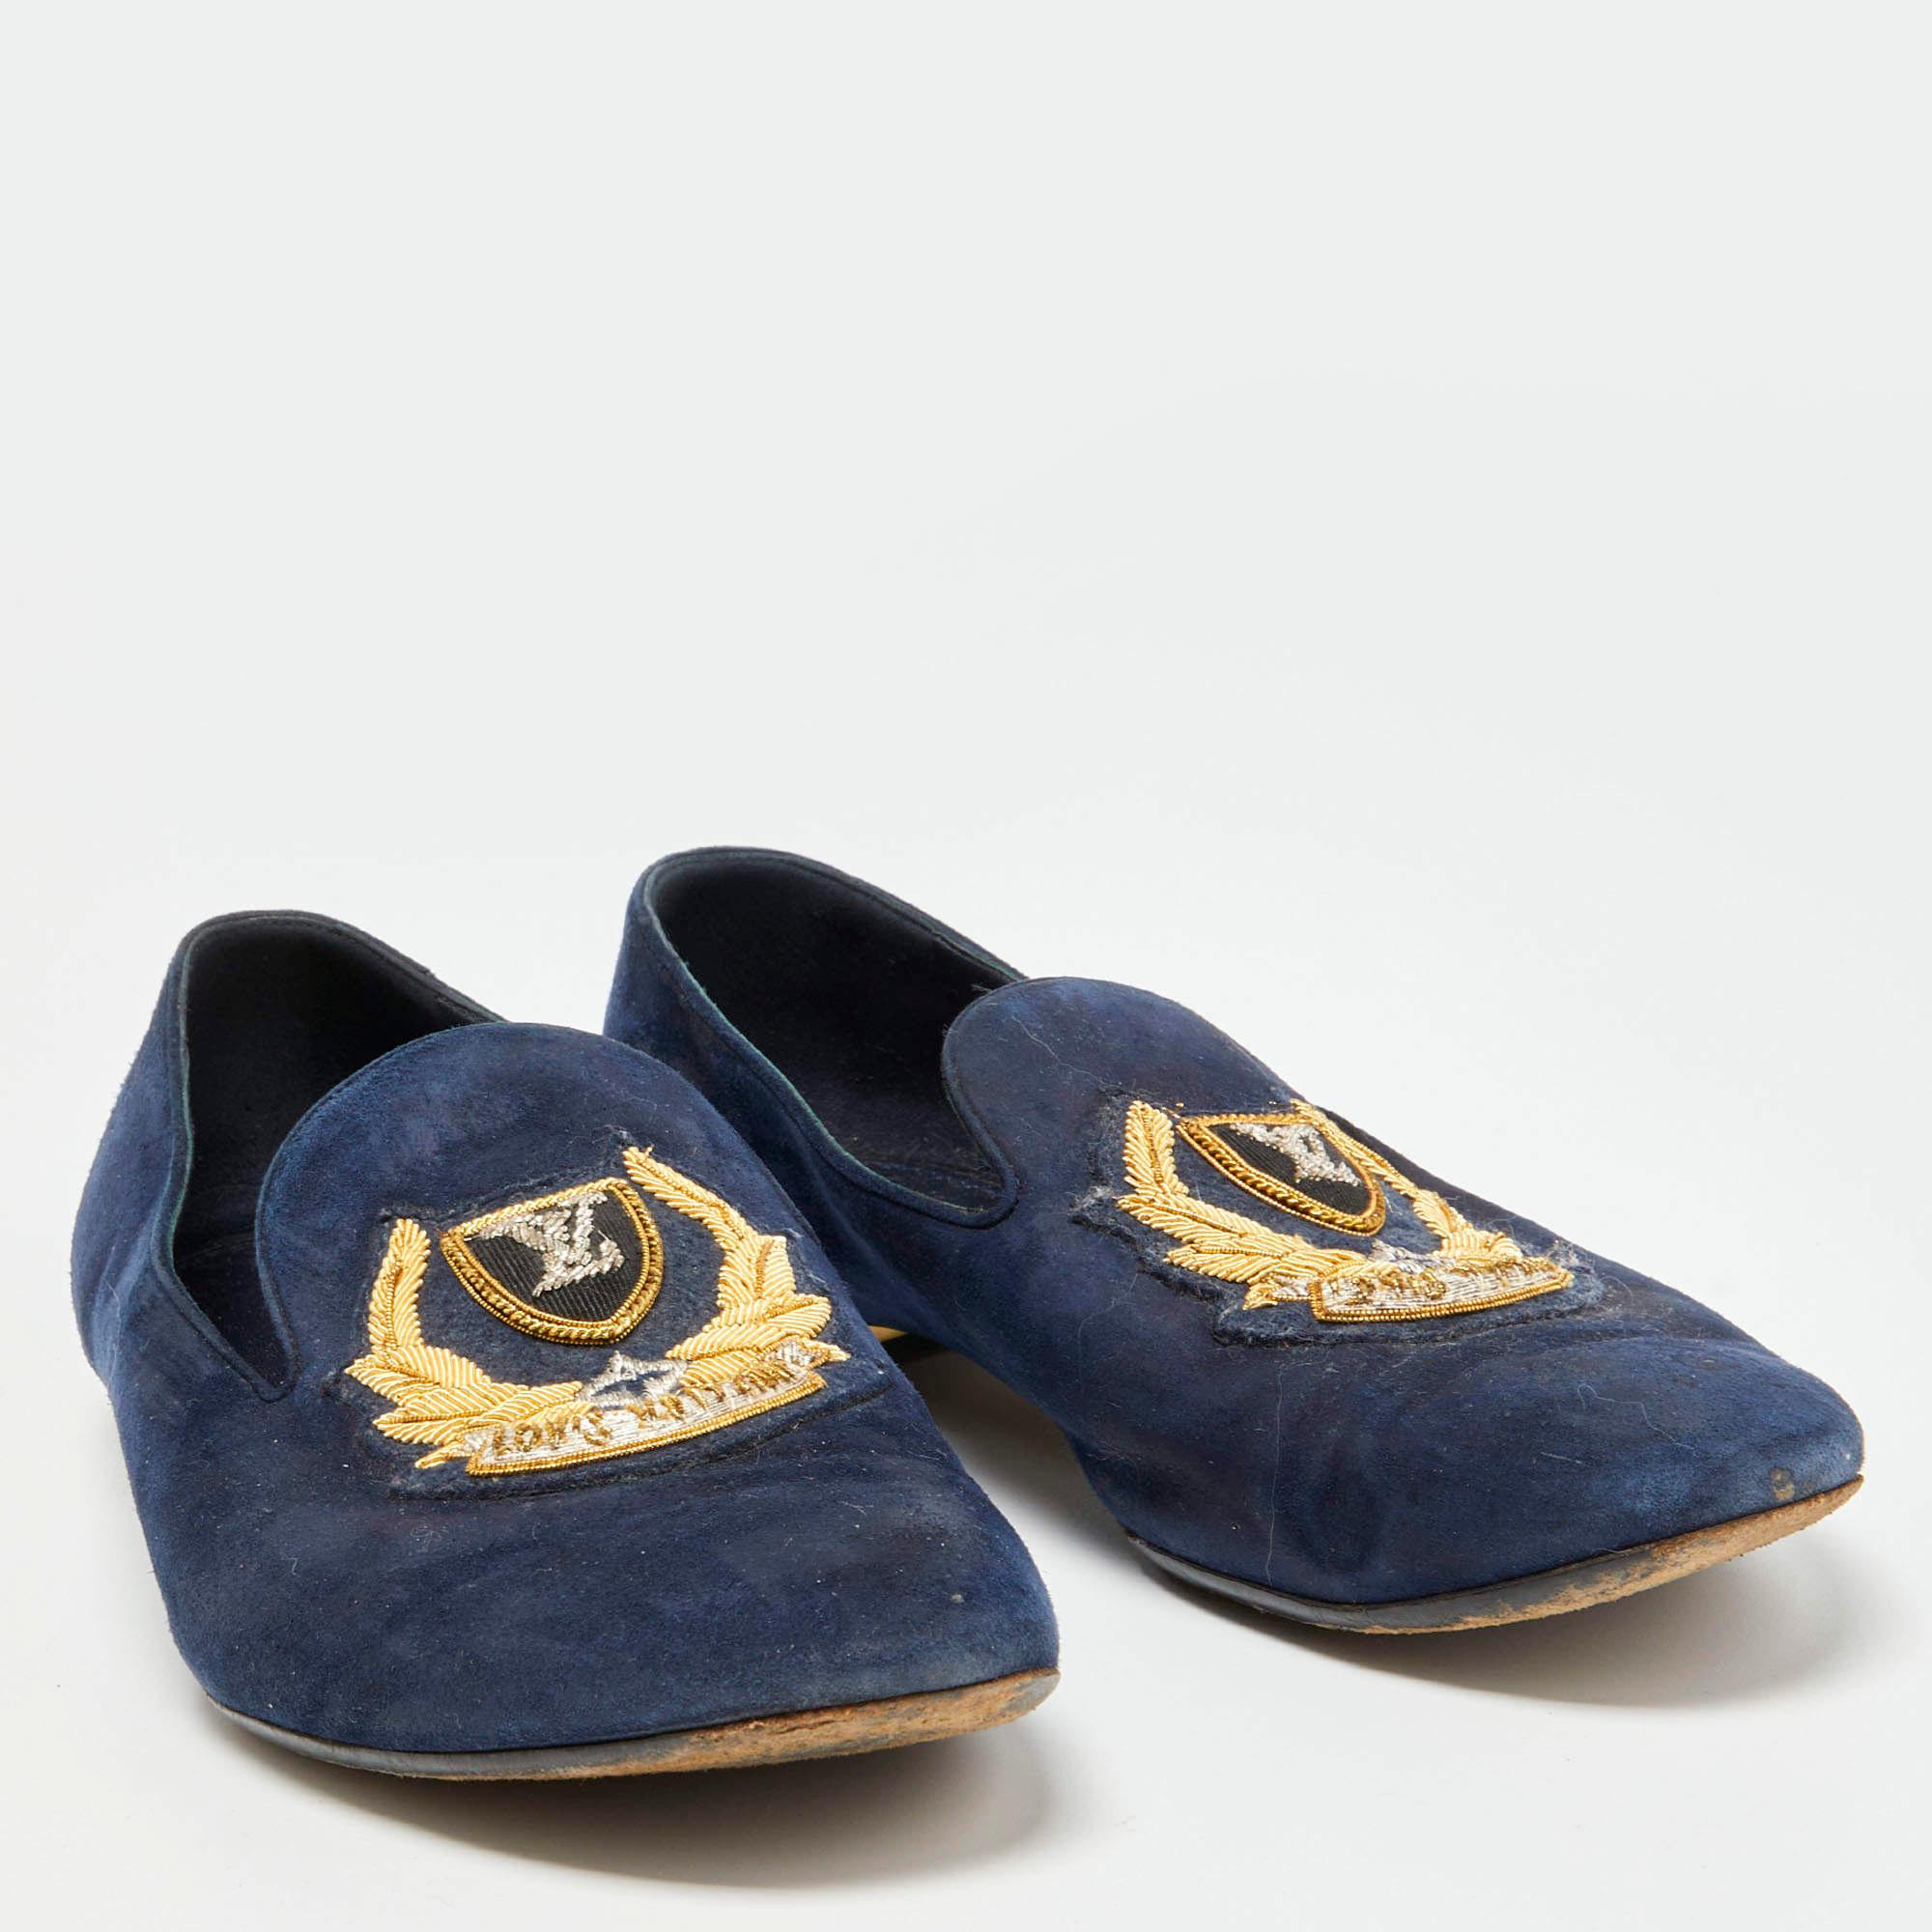 Louis Vuitton Navy Blue Suede Embroidered Smoking Slippers Size 38 In Good Condition For Sale In Dubai, Al Qouz 2